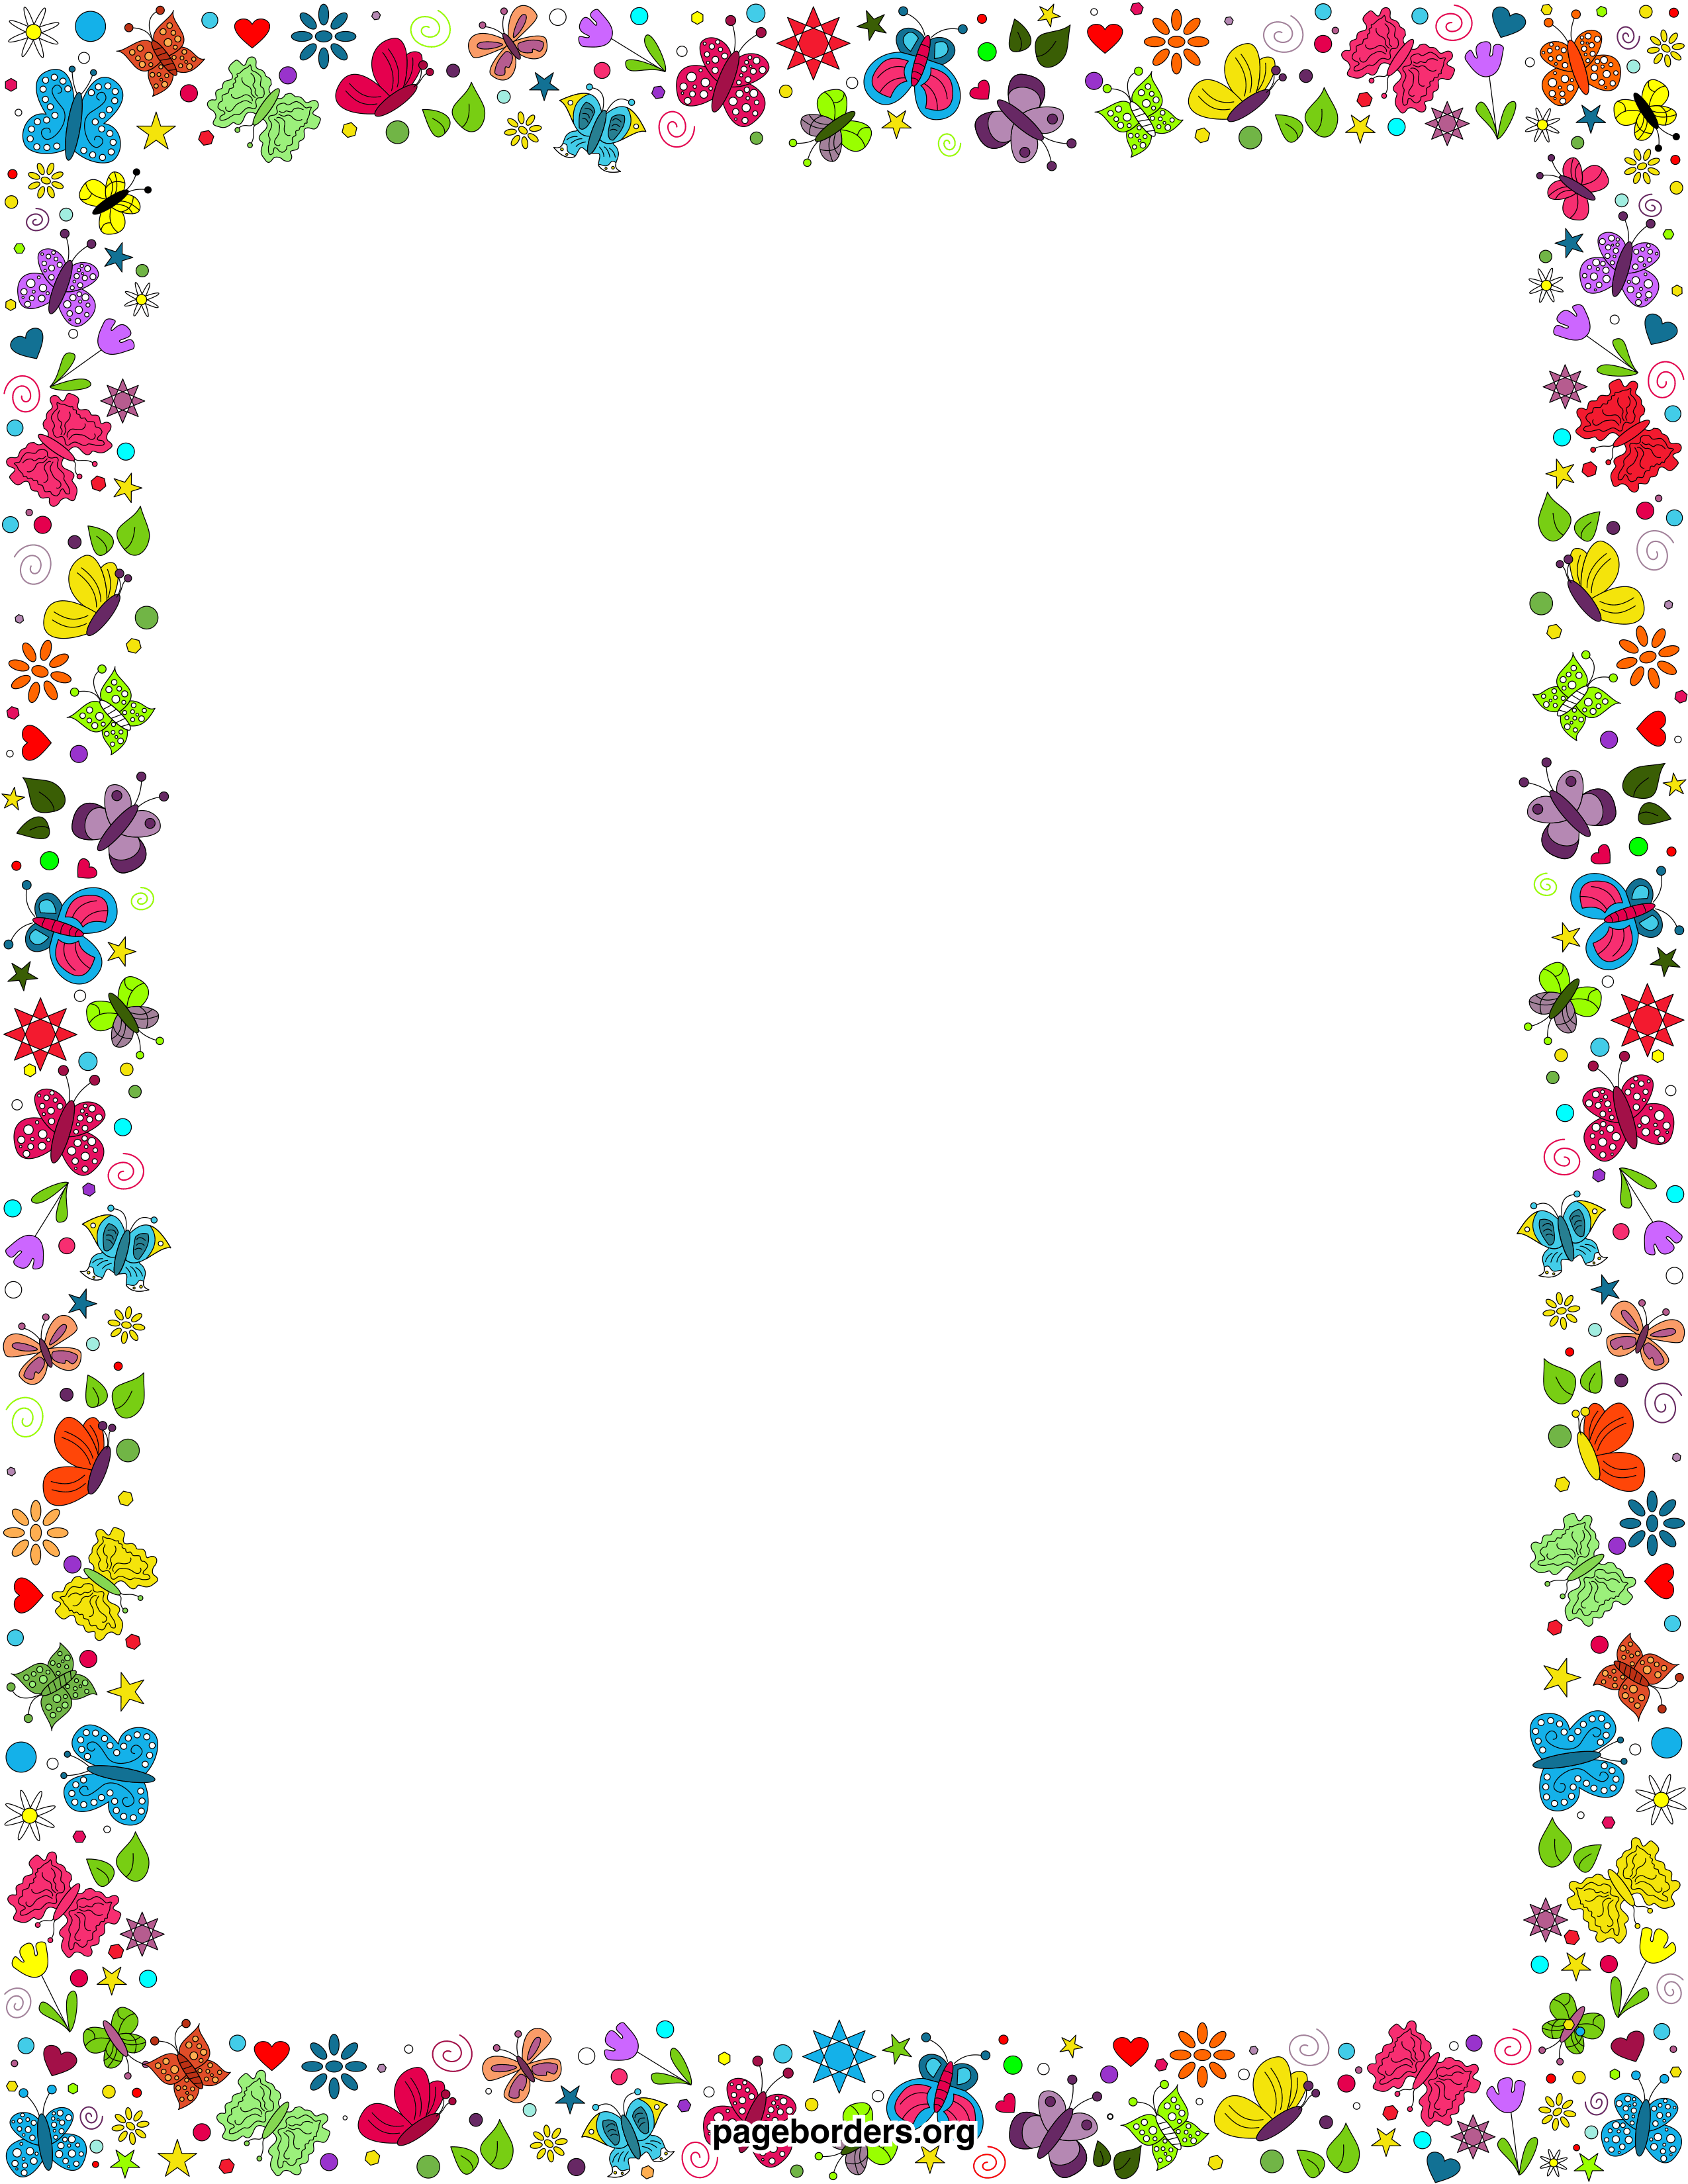 butterfly border clipart free